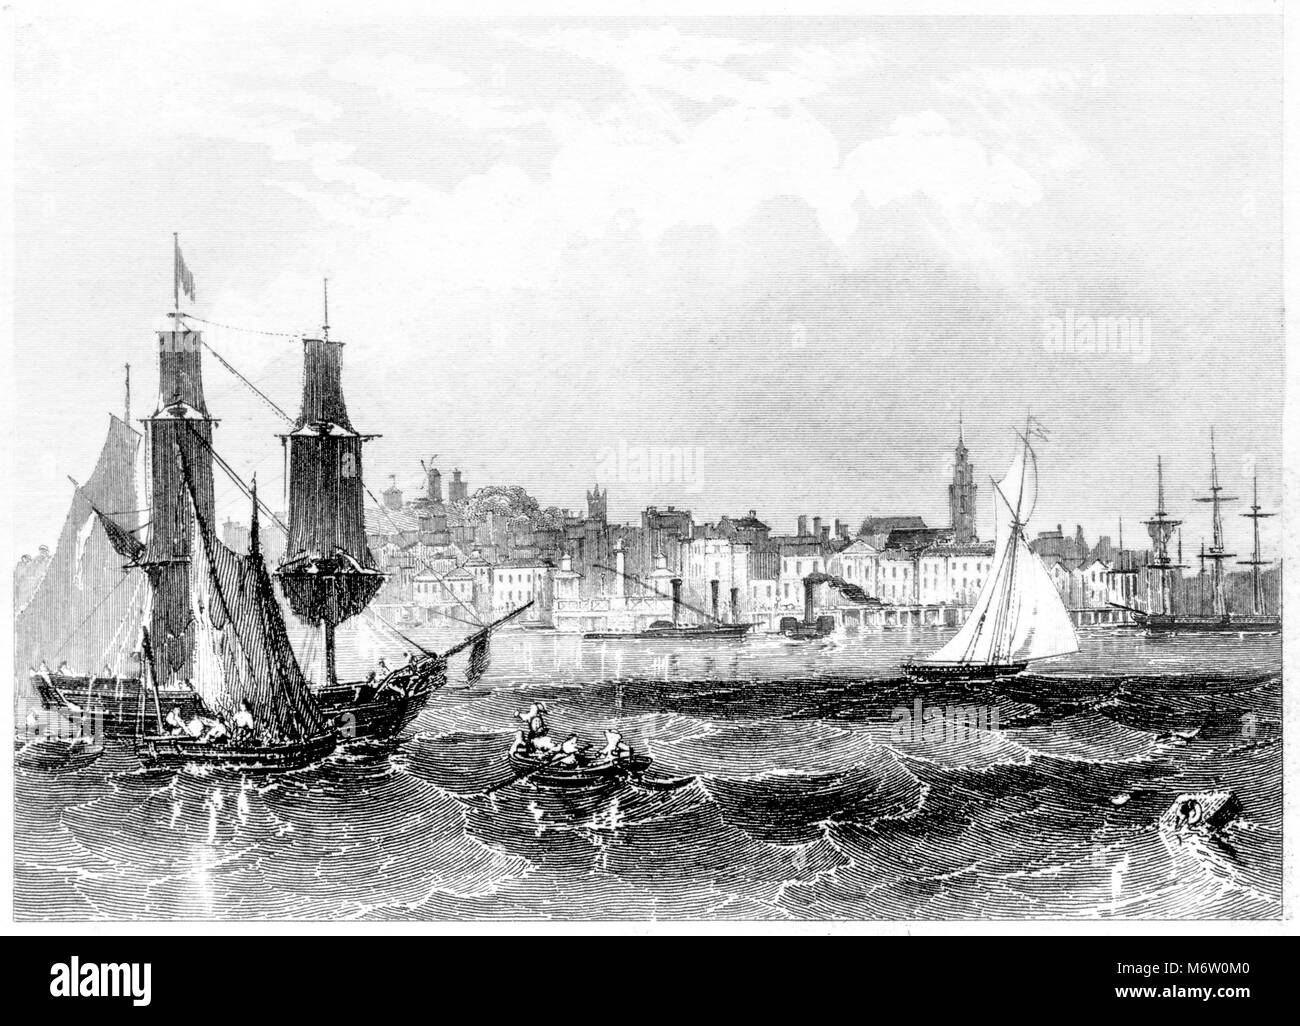 An engraving of Gravesend scanned at high resolution from a book printed in 1851. Believed copyright free. Stock Photo